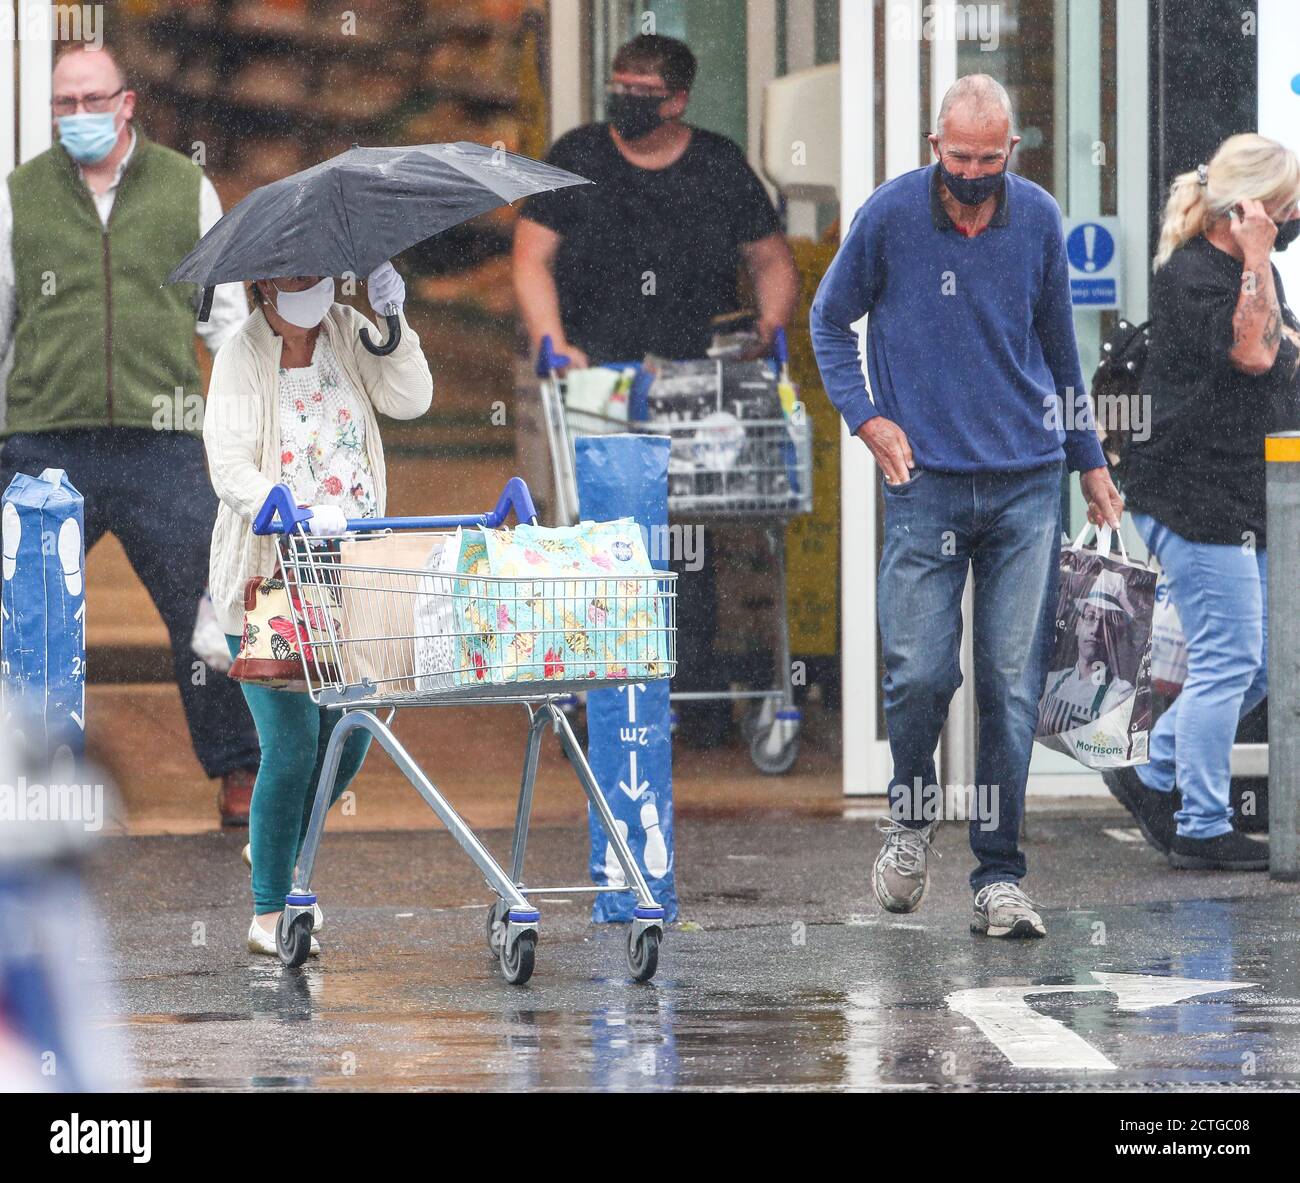 New Forest, Hampshire. 23rd September 2020. UK Weather. Shoppers at Tesco in the New Forest are caught out by heavy rain showers. Credit Stuart Martin/Alamy Live News Stock Photo